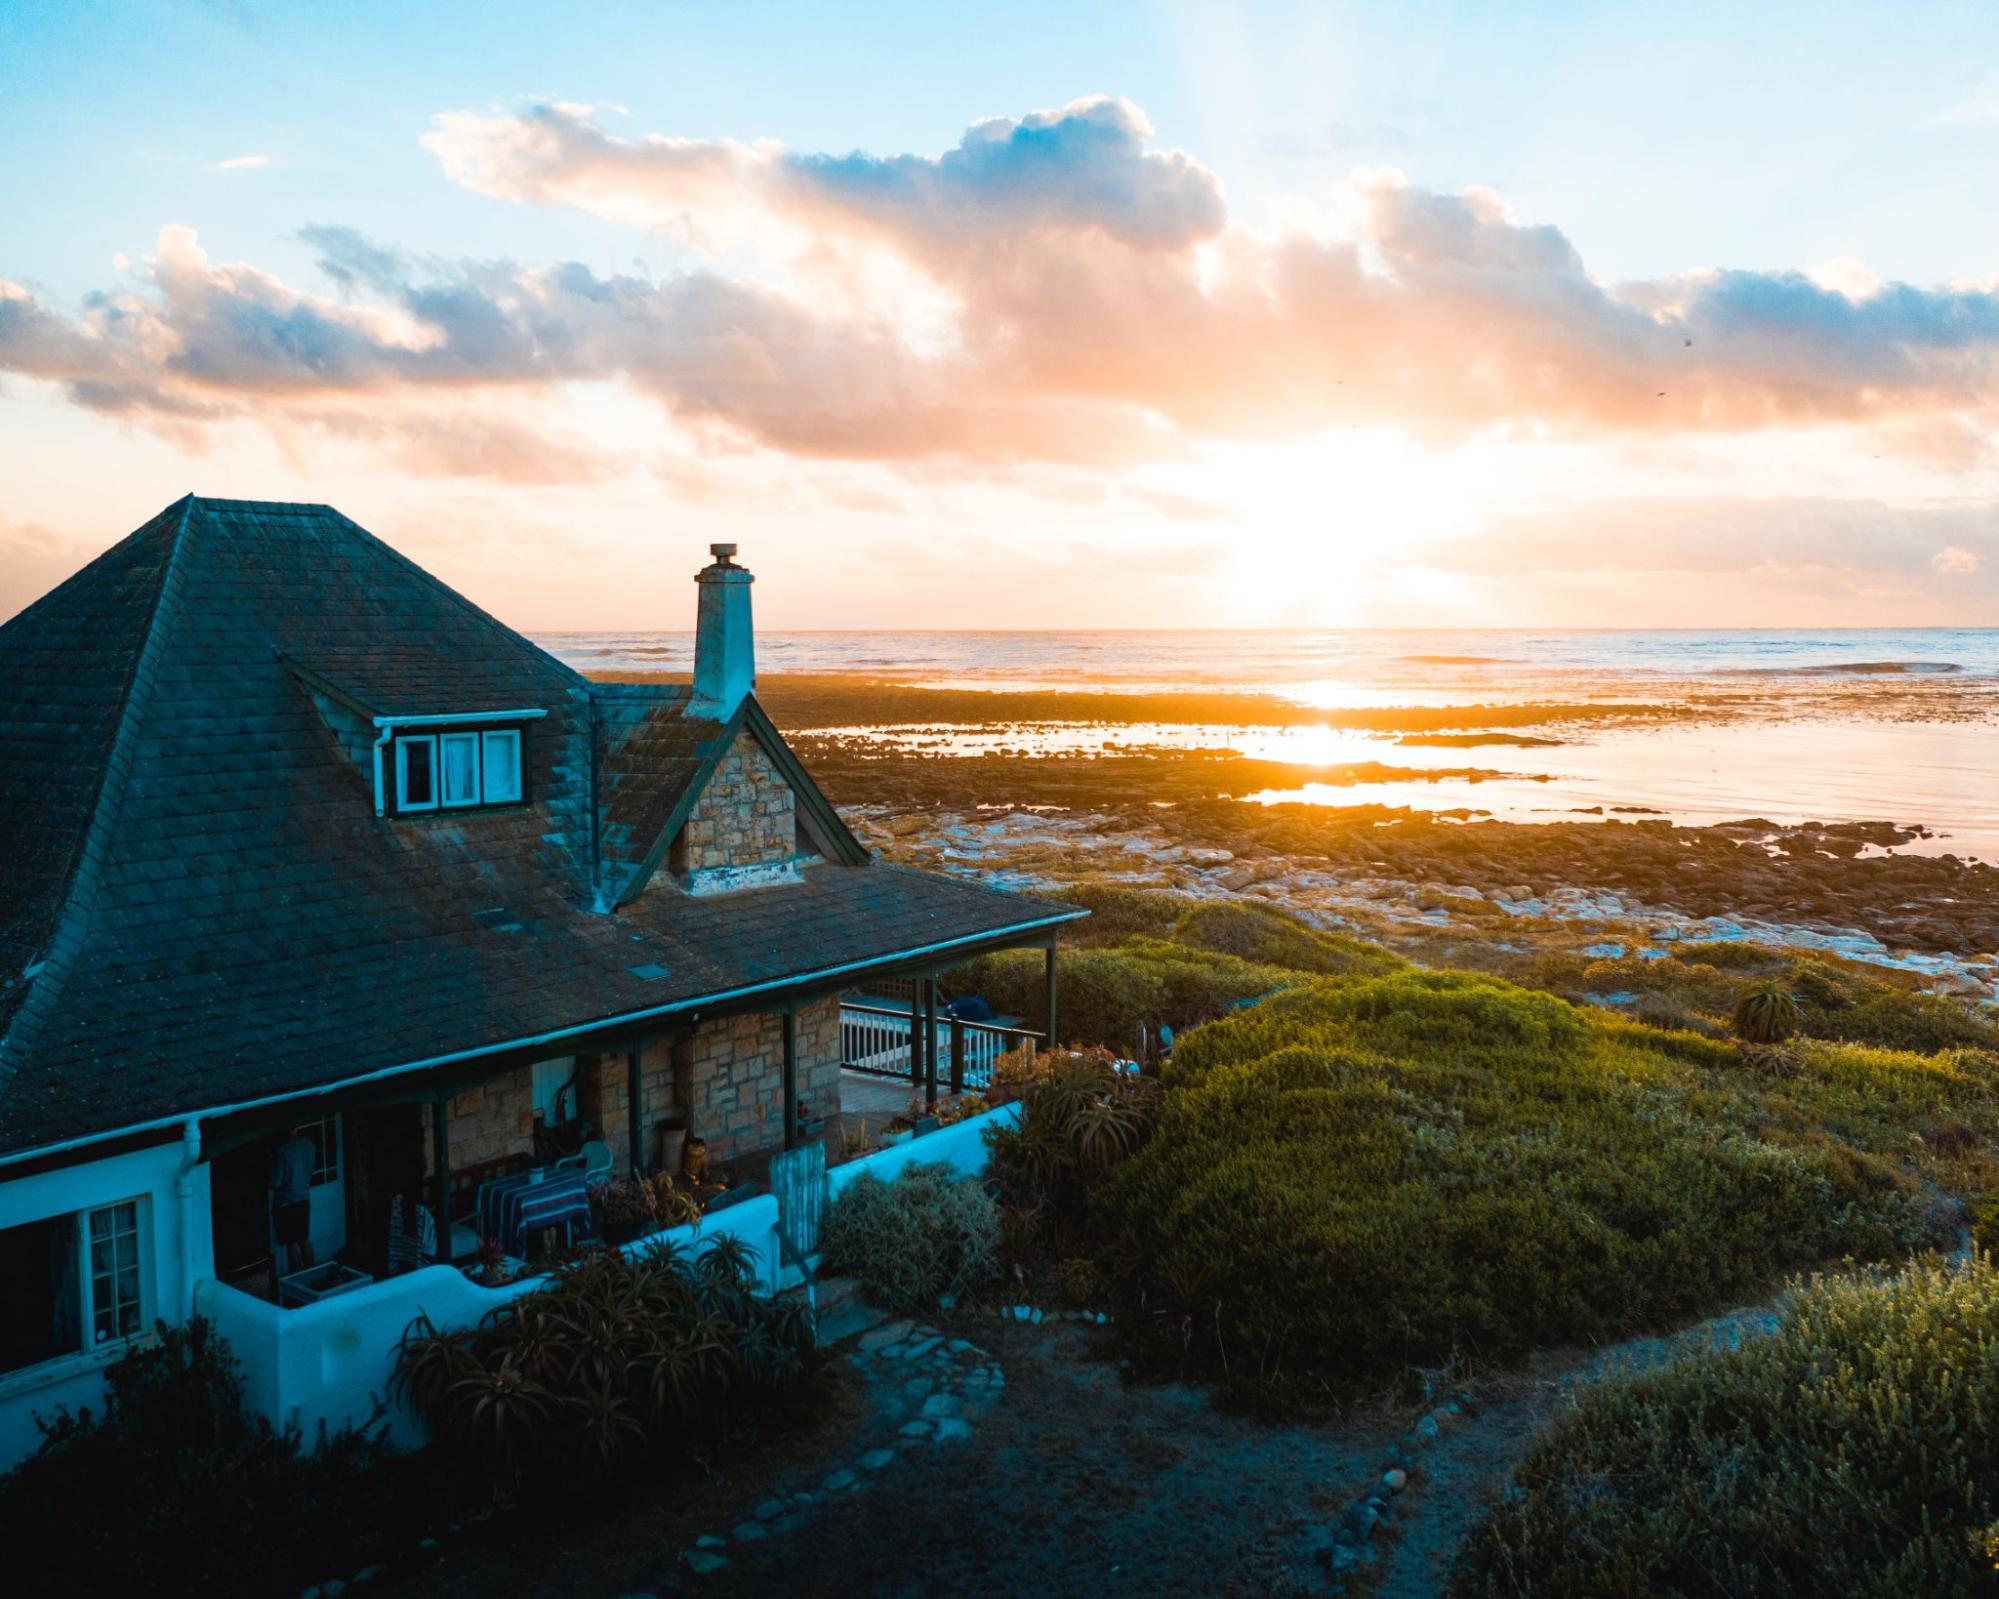 An aerial view of a vacation home on the beach at sunset.